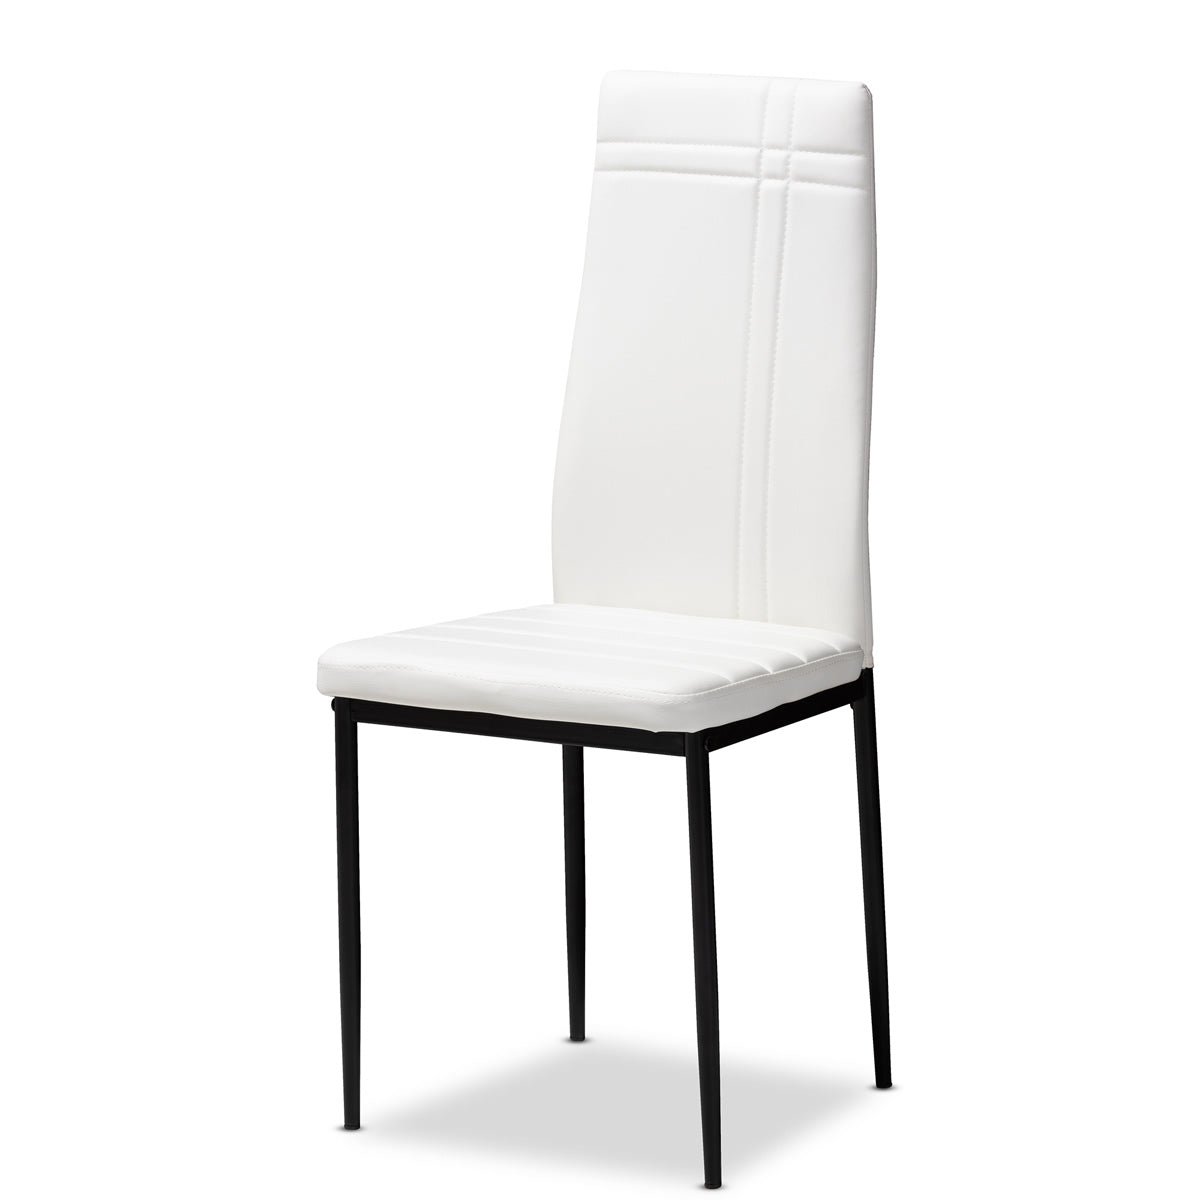 Baxton Studio Matiese Modern and Contemporary White Faux Leather Upholstered Dining Chair (Set of 4) Baxton Studio-dining chair-Minimal And Modern - 2